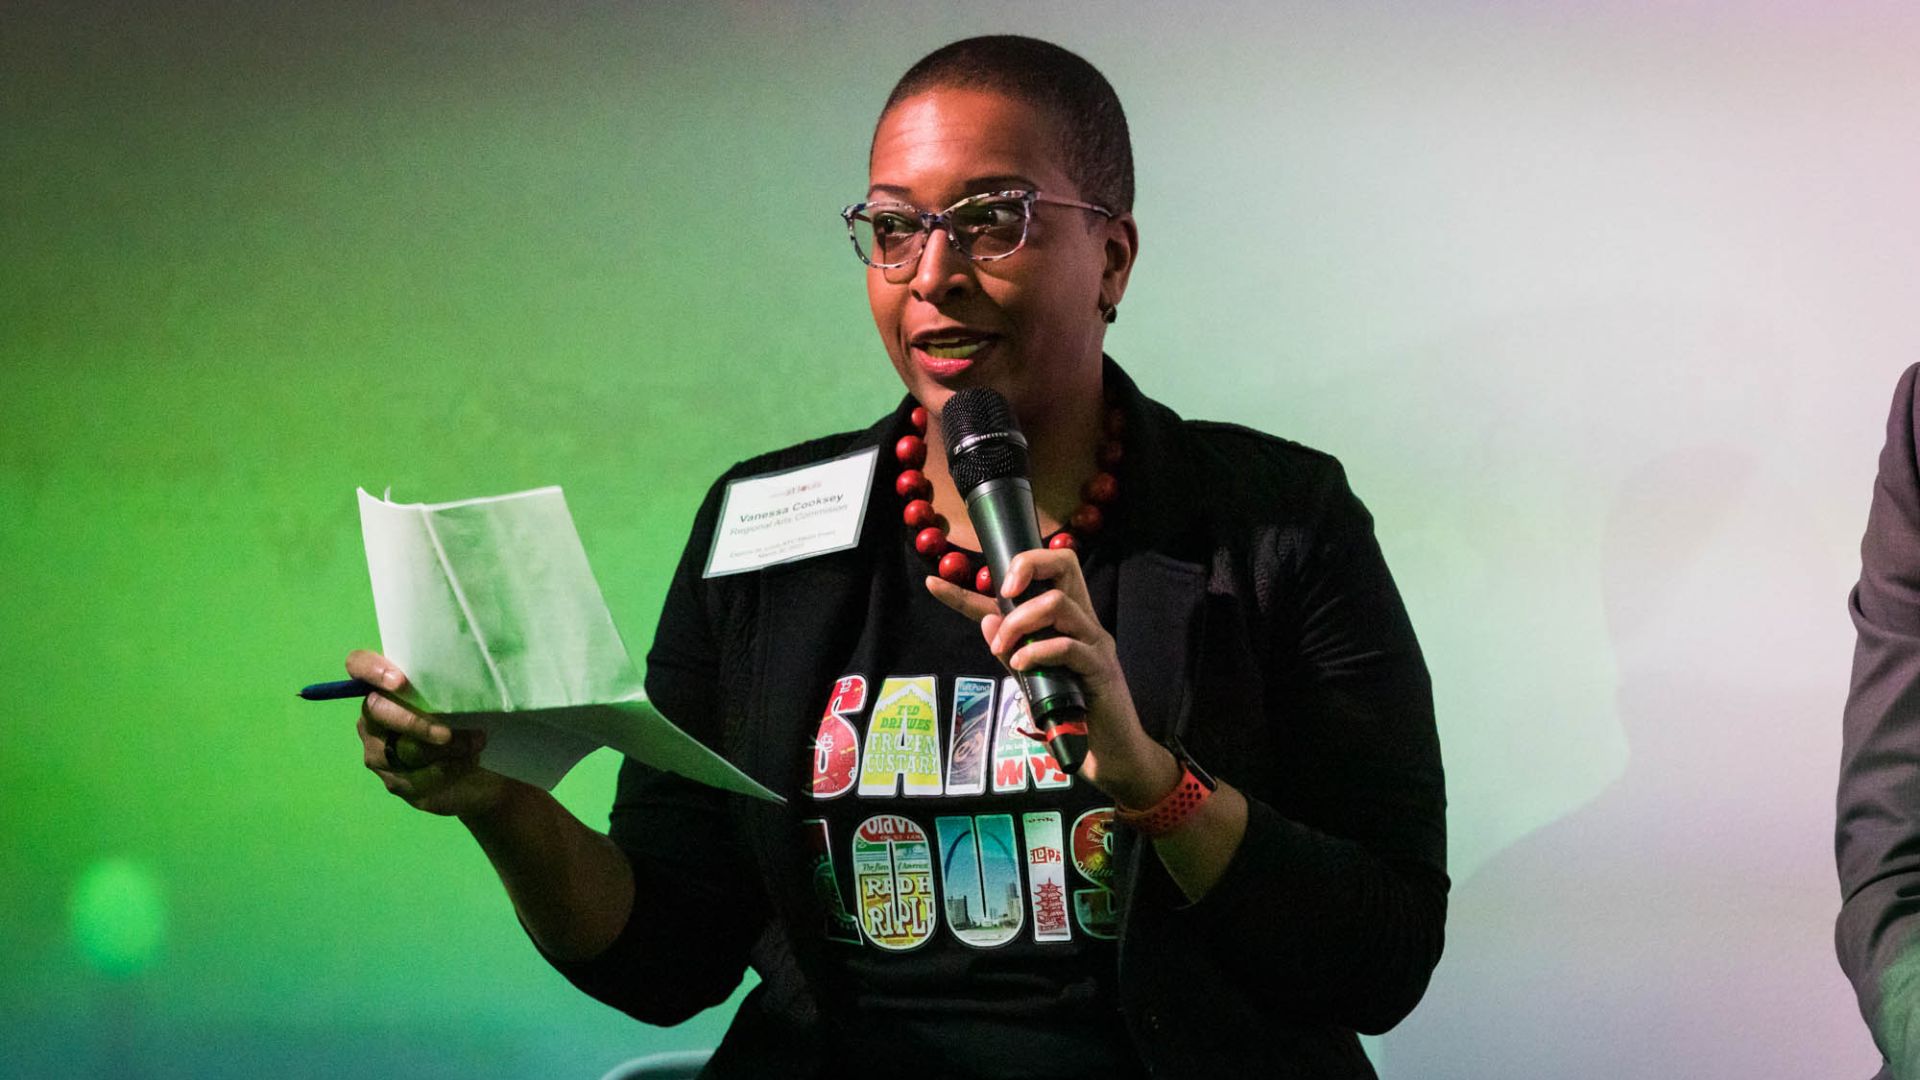 Vanessa Cooksey moderated the New York City arts panel organized by Explore St. Louis.